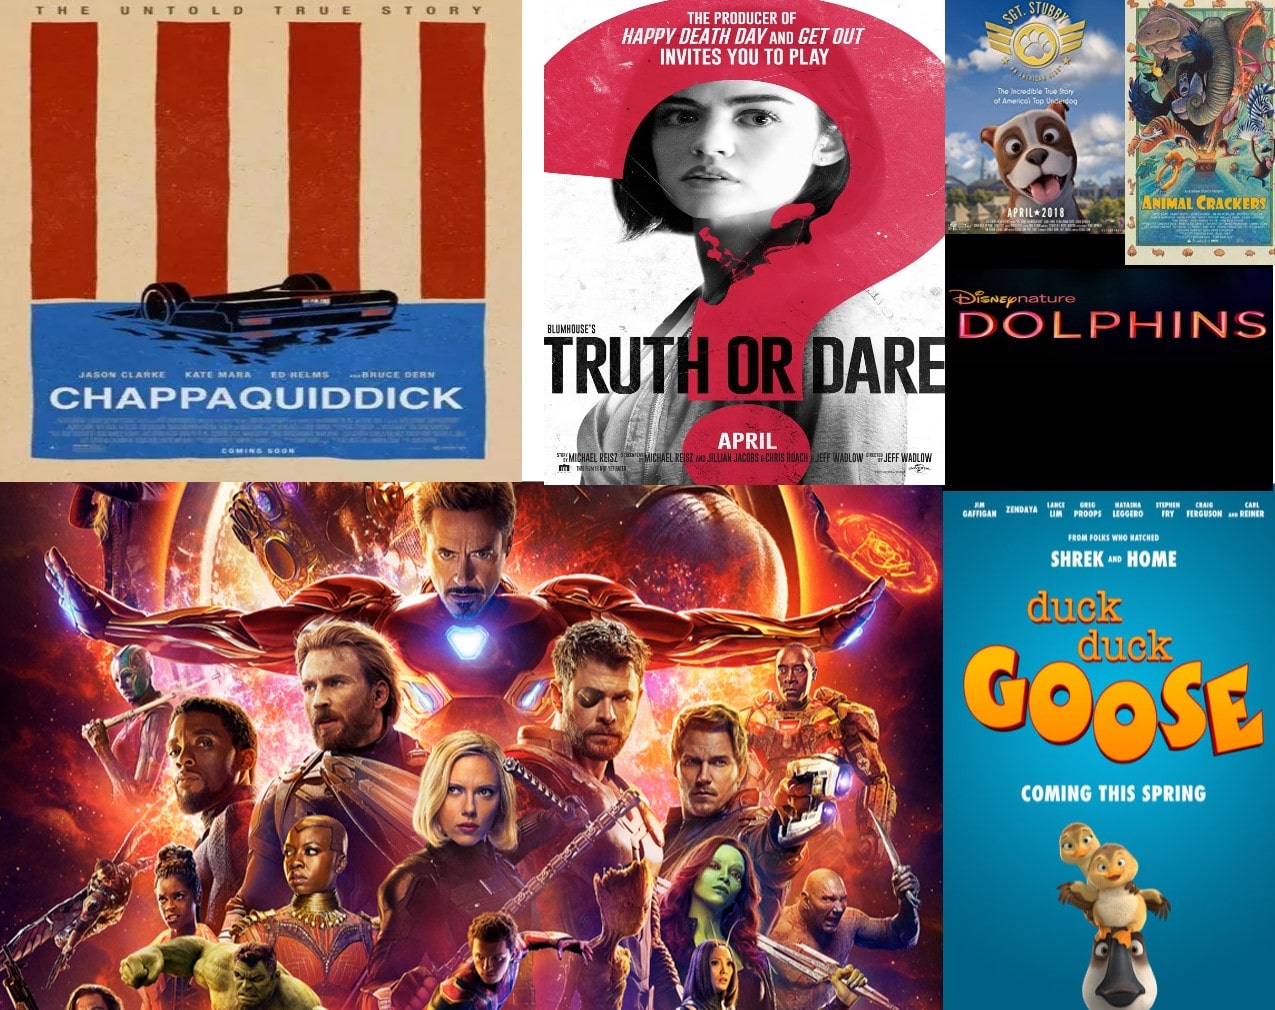 Movies to look forward to in April